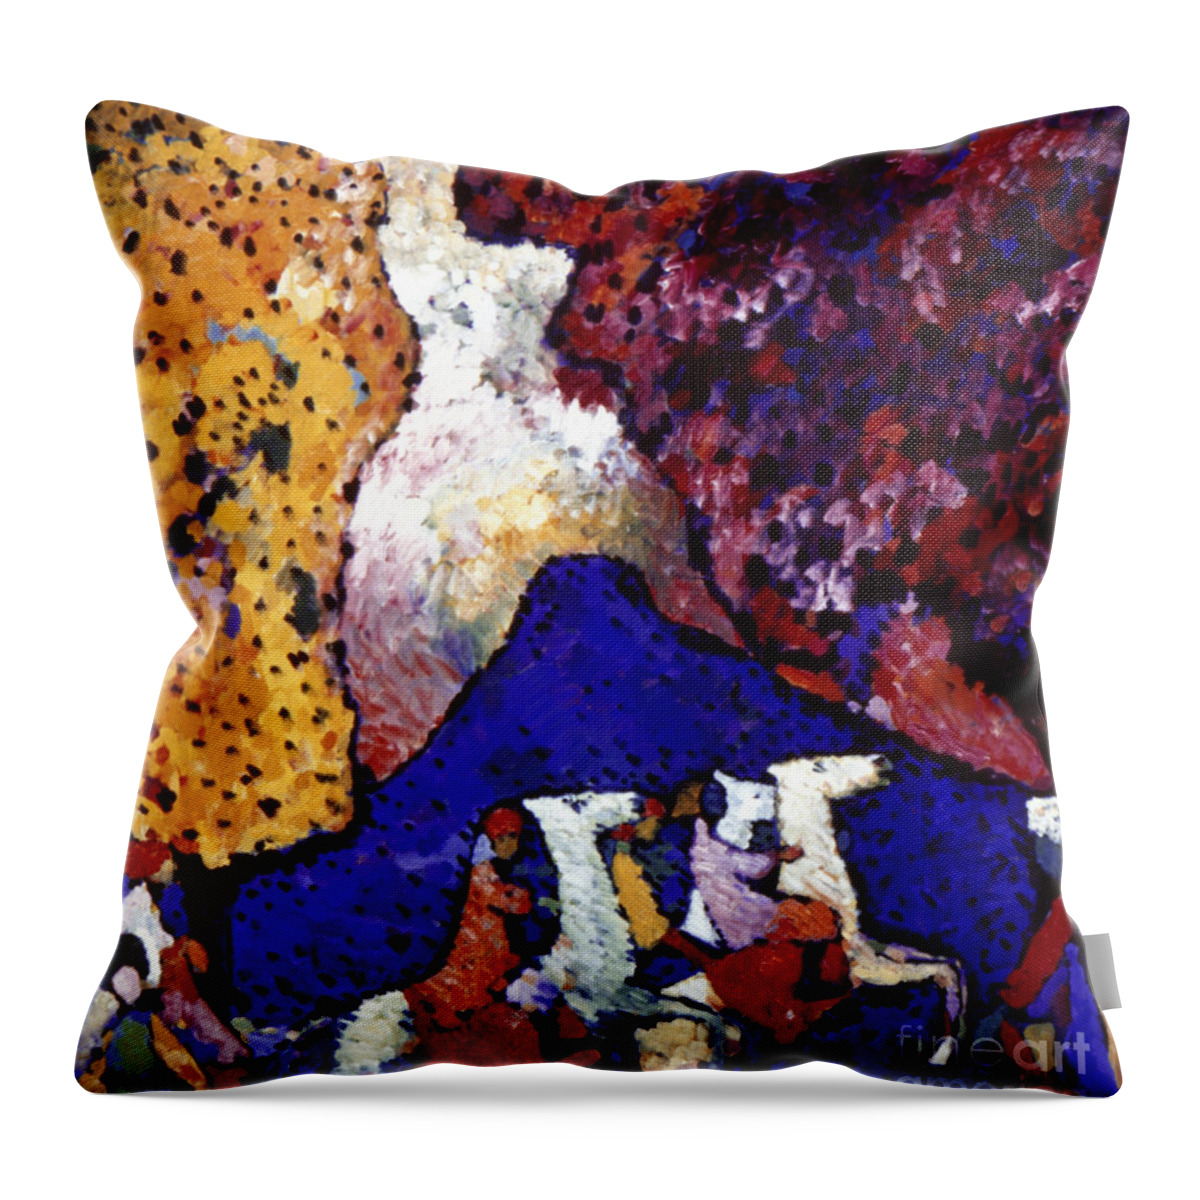 1908 Throw Pillow featuring the photograph Mountain, 1908 by Wassily Kandinsky